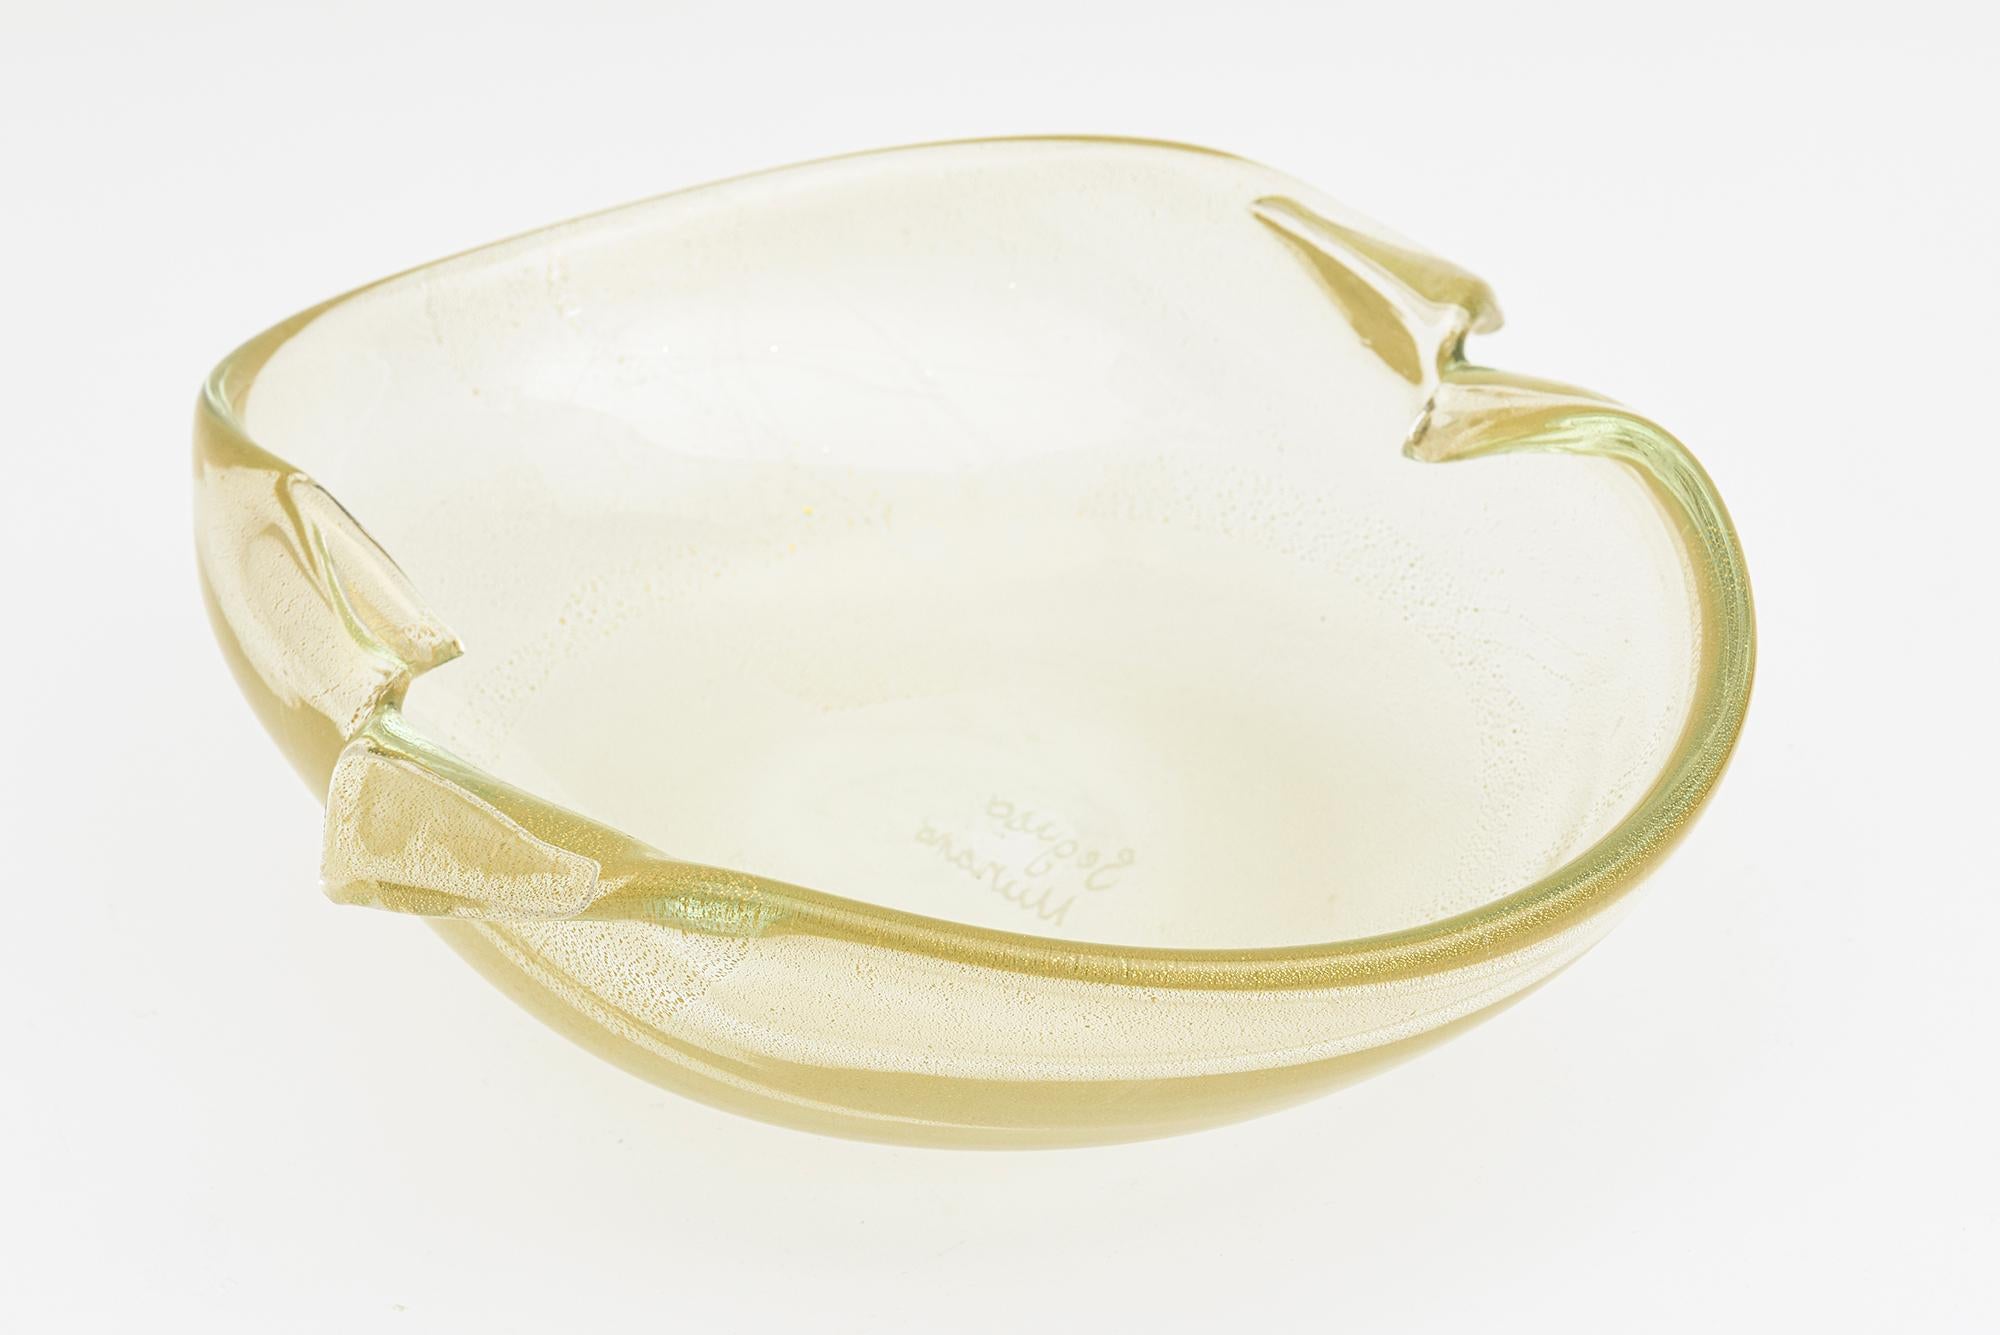 This over scaled elegant vintage Murano blown glass bowl is signed by Seguso. It is abundant with gold aventurine and the top portion has hints of light green at the top. it has beautiful light of gold to it. It is from the island of Murano from the